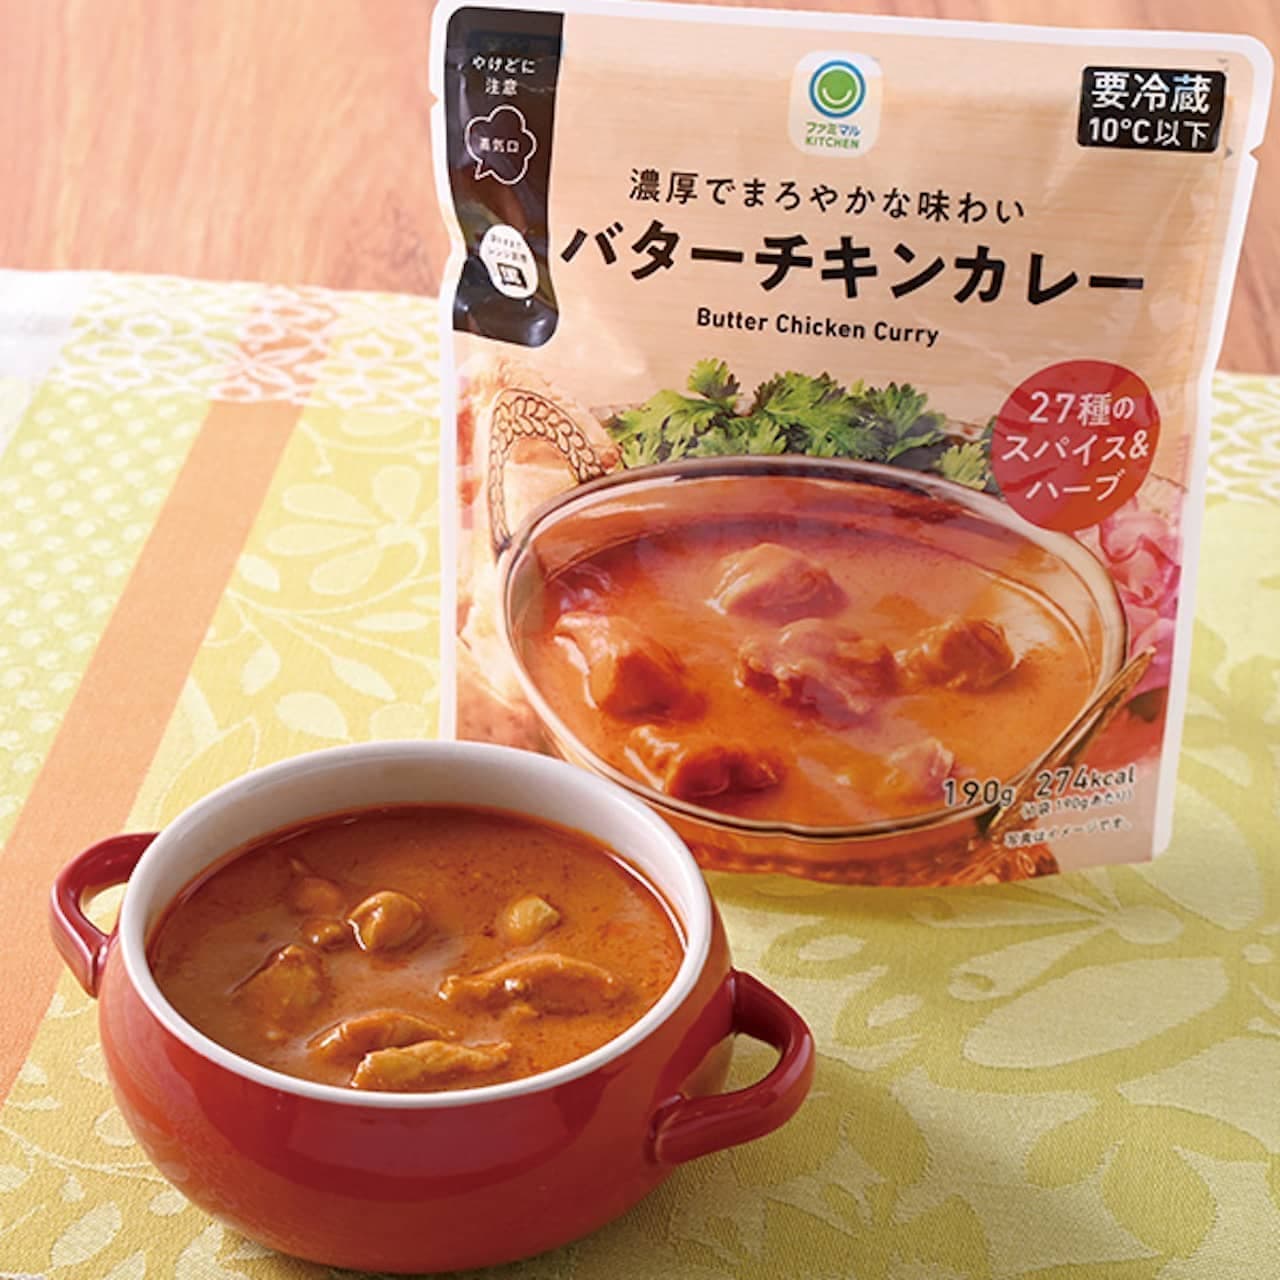 Famima "Rich and Mild Taste Butter Chicken Curry